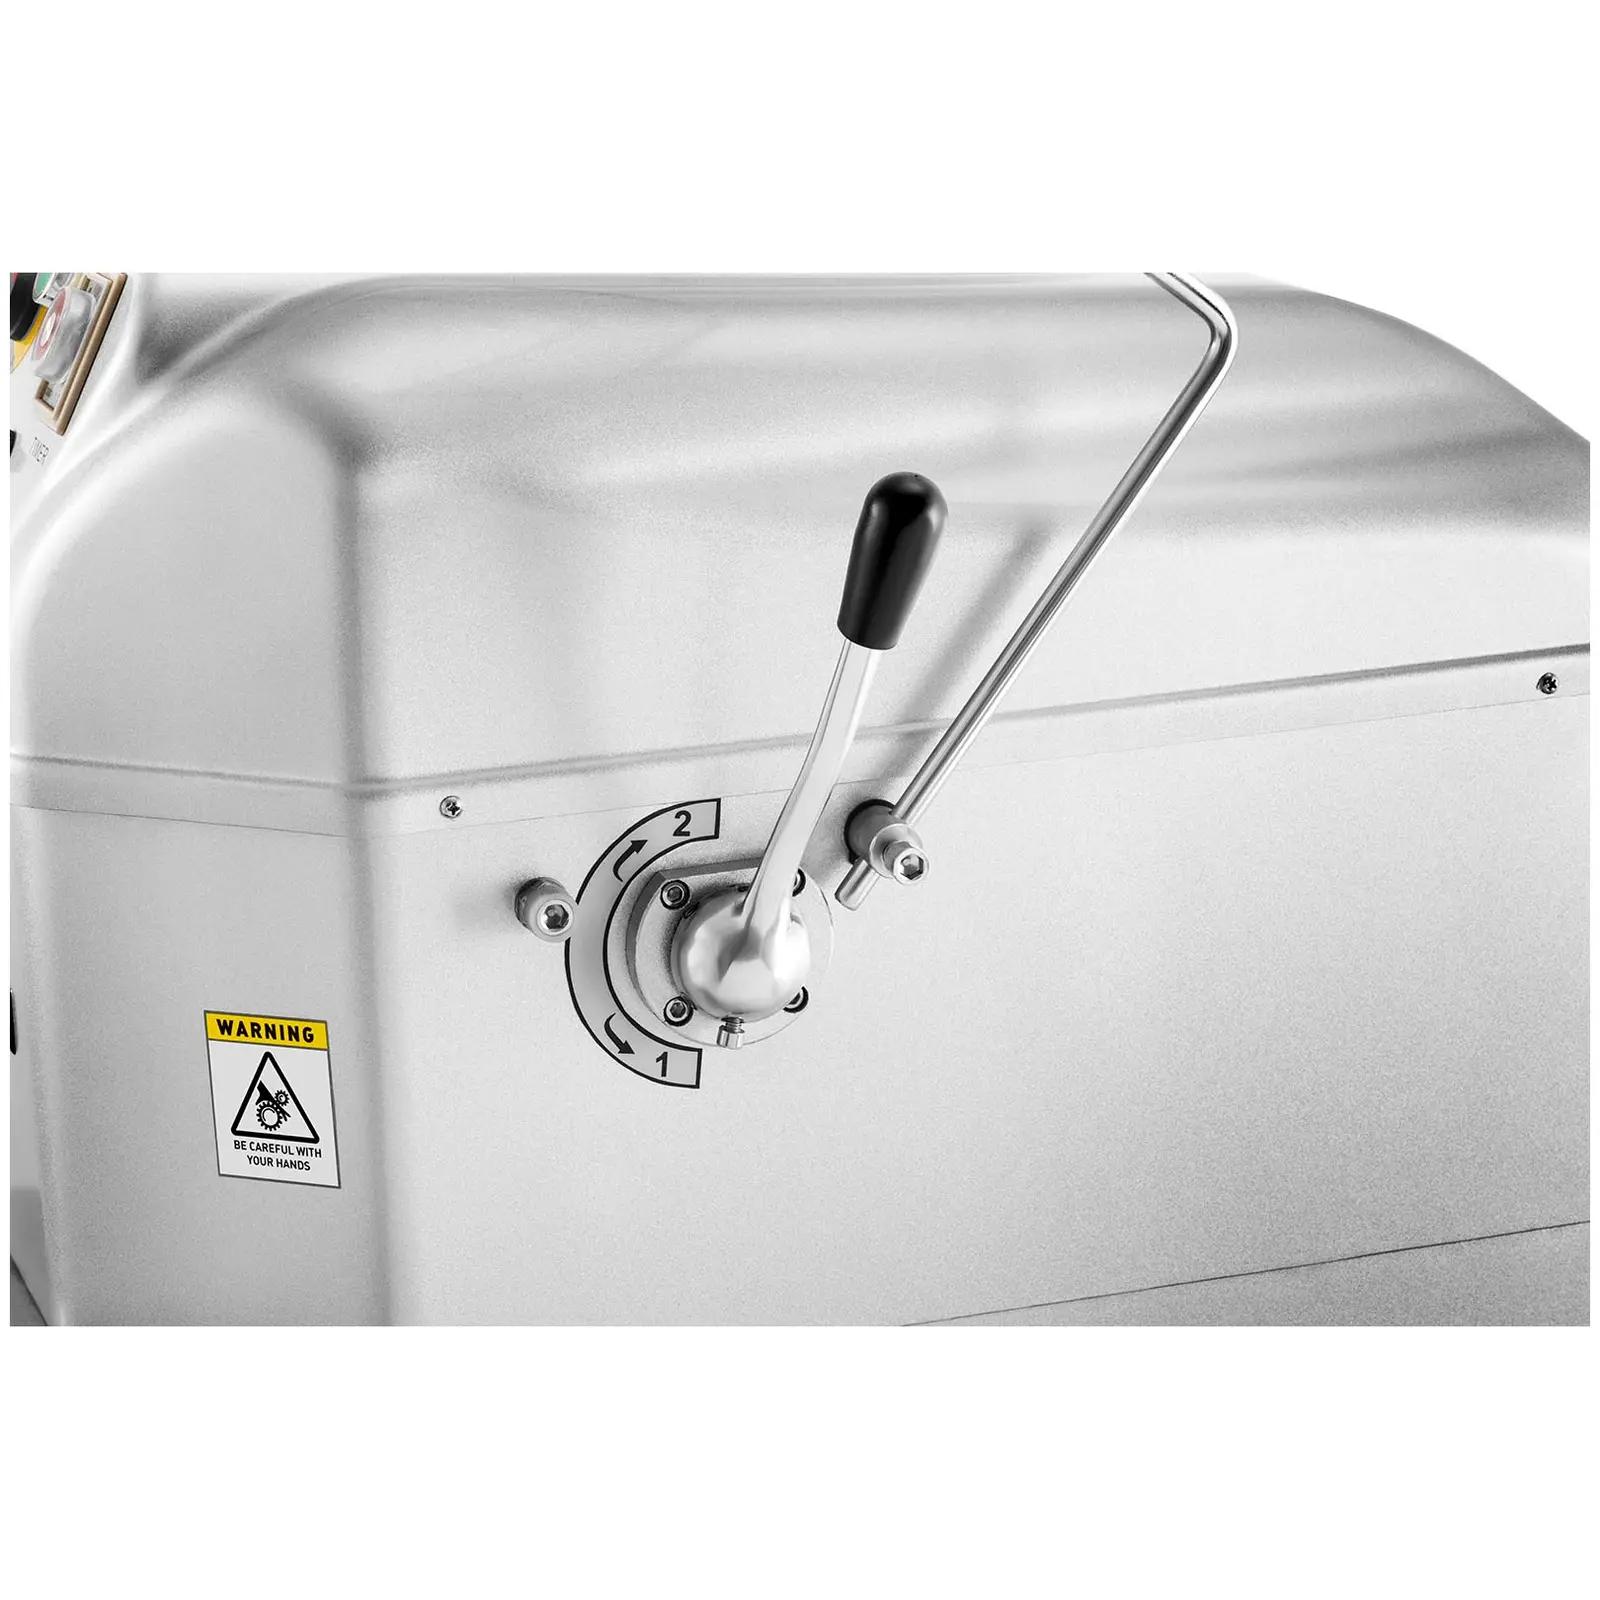 Batedeira profissional - 30 l - Royal Catering - 2100 W